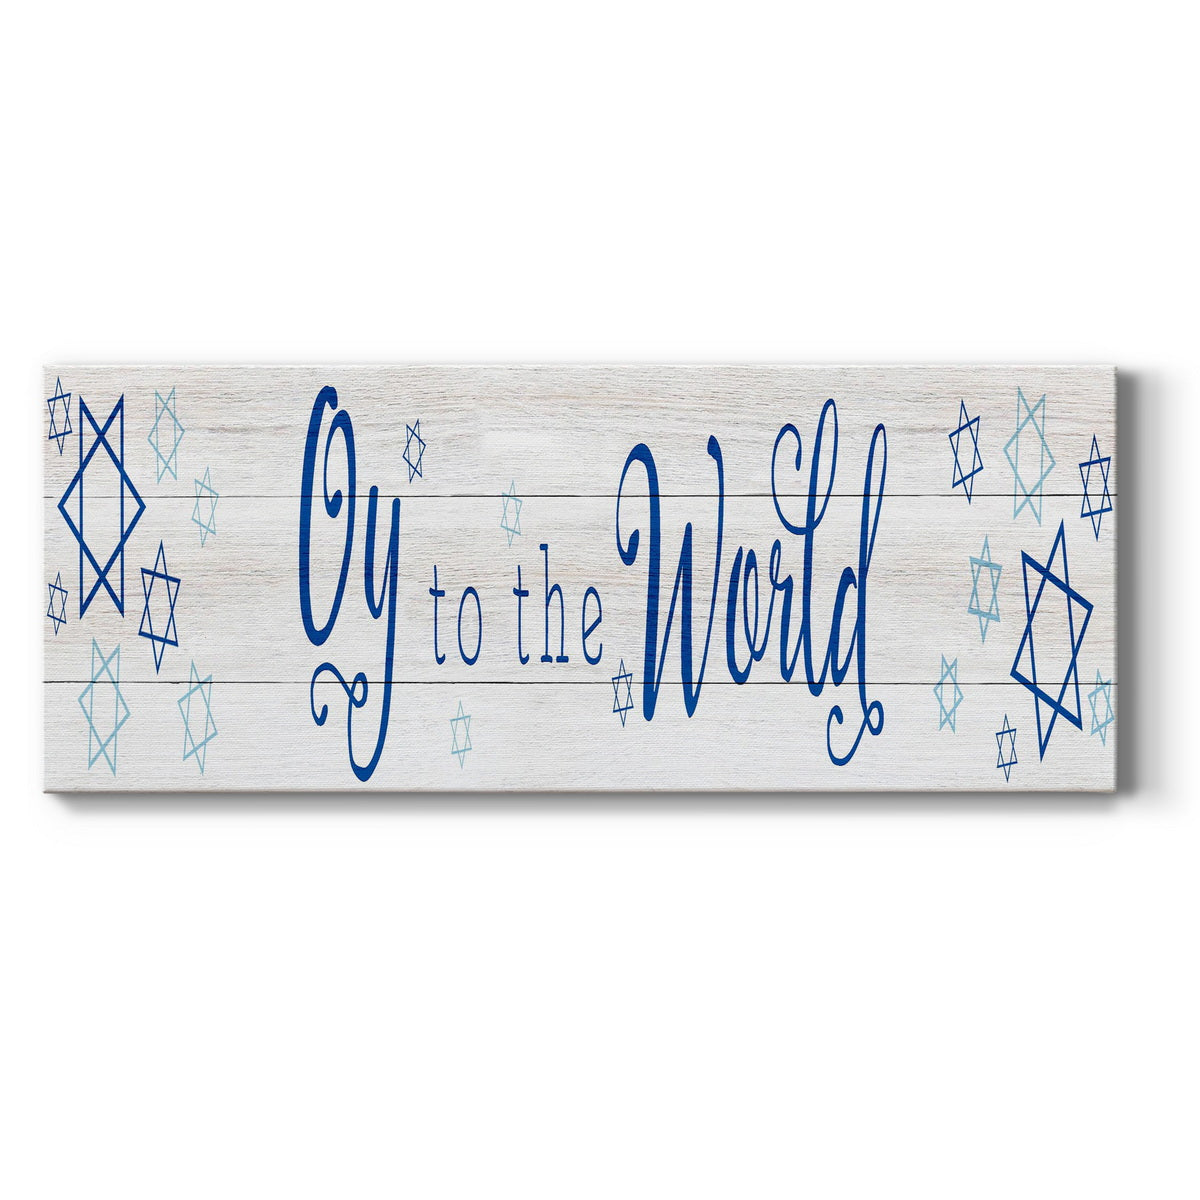 Oy to the World Premium Gallery Wrapped Canvas - Ready to Hang